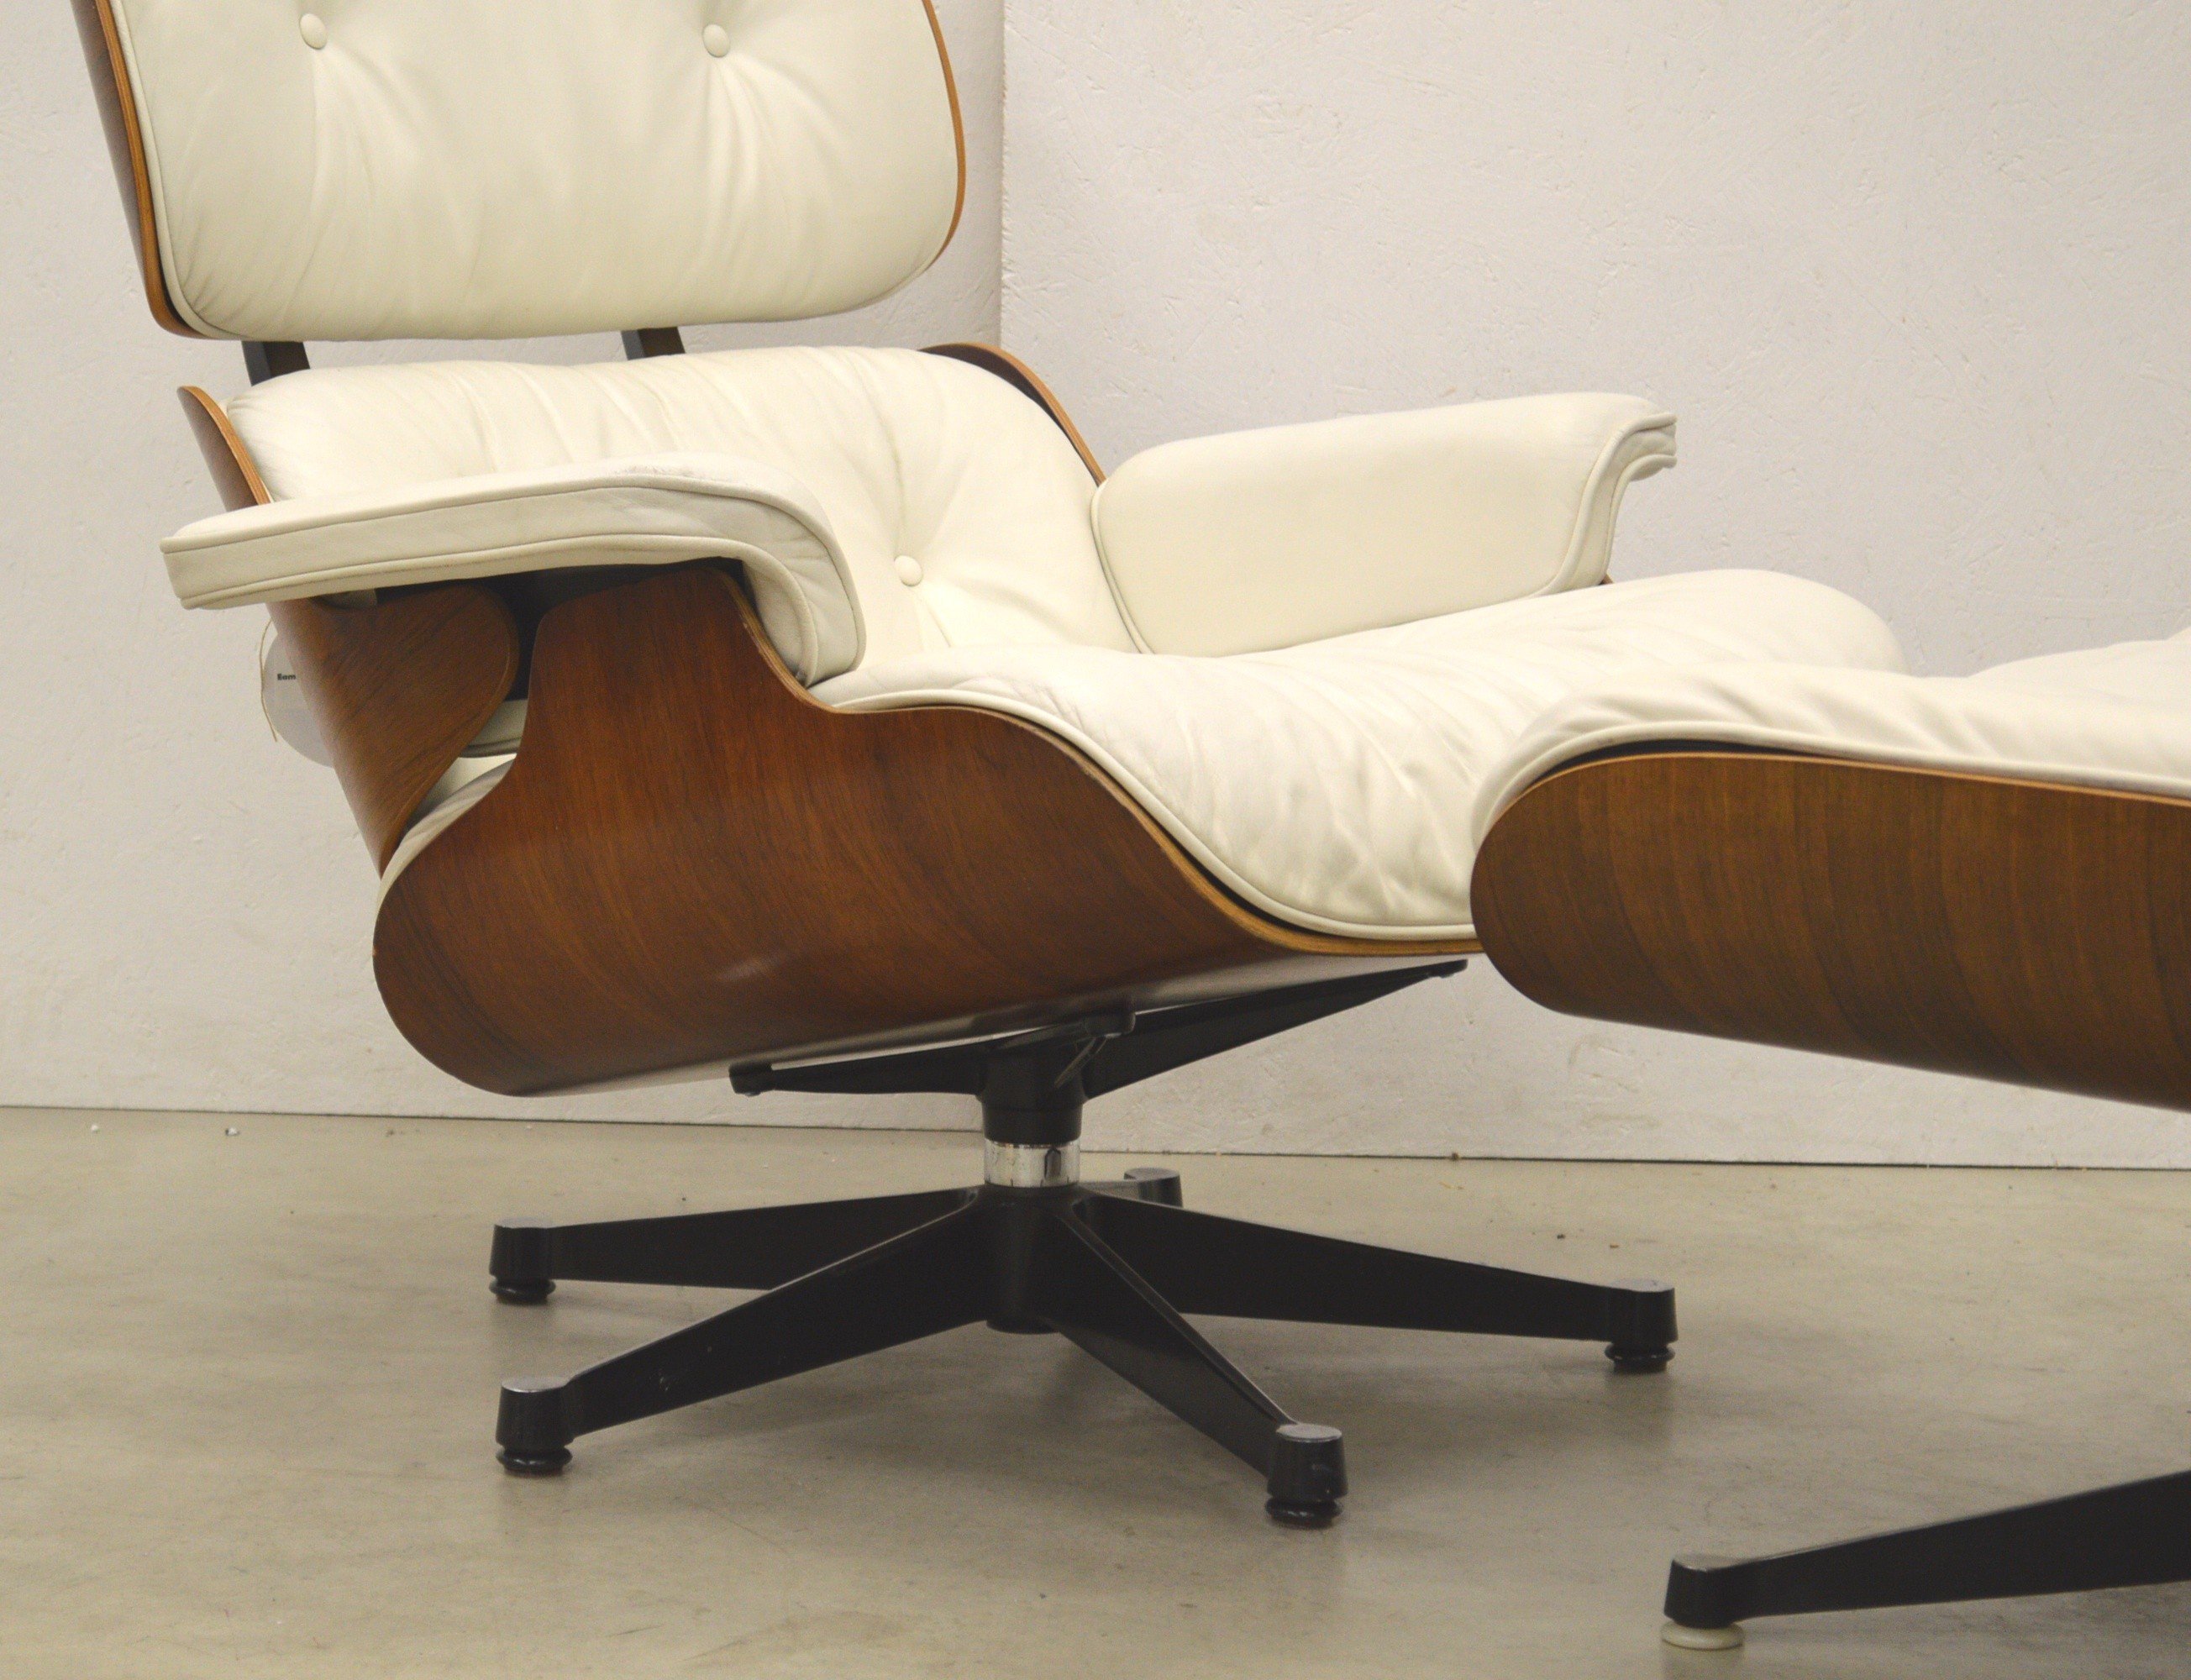 Vintage white lounge chair by Charles Eames for Herman